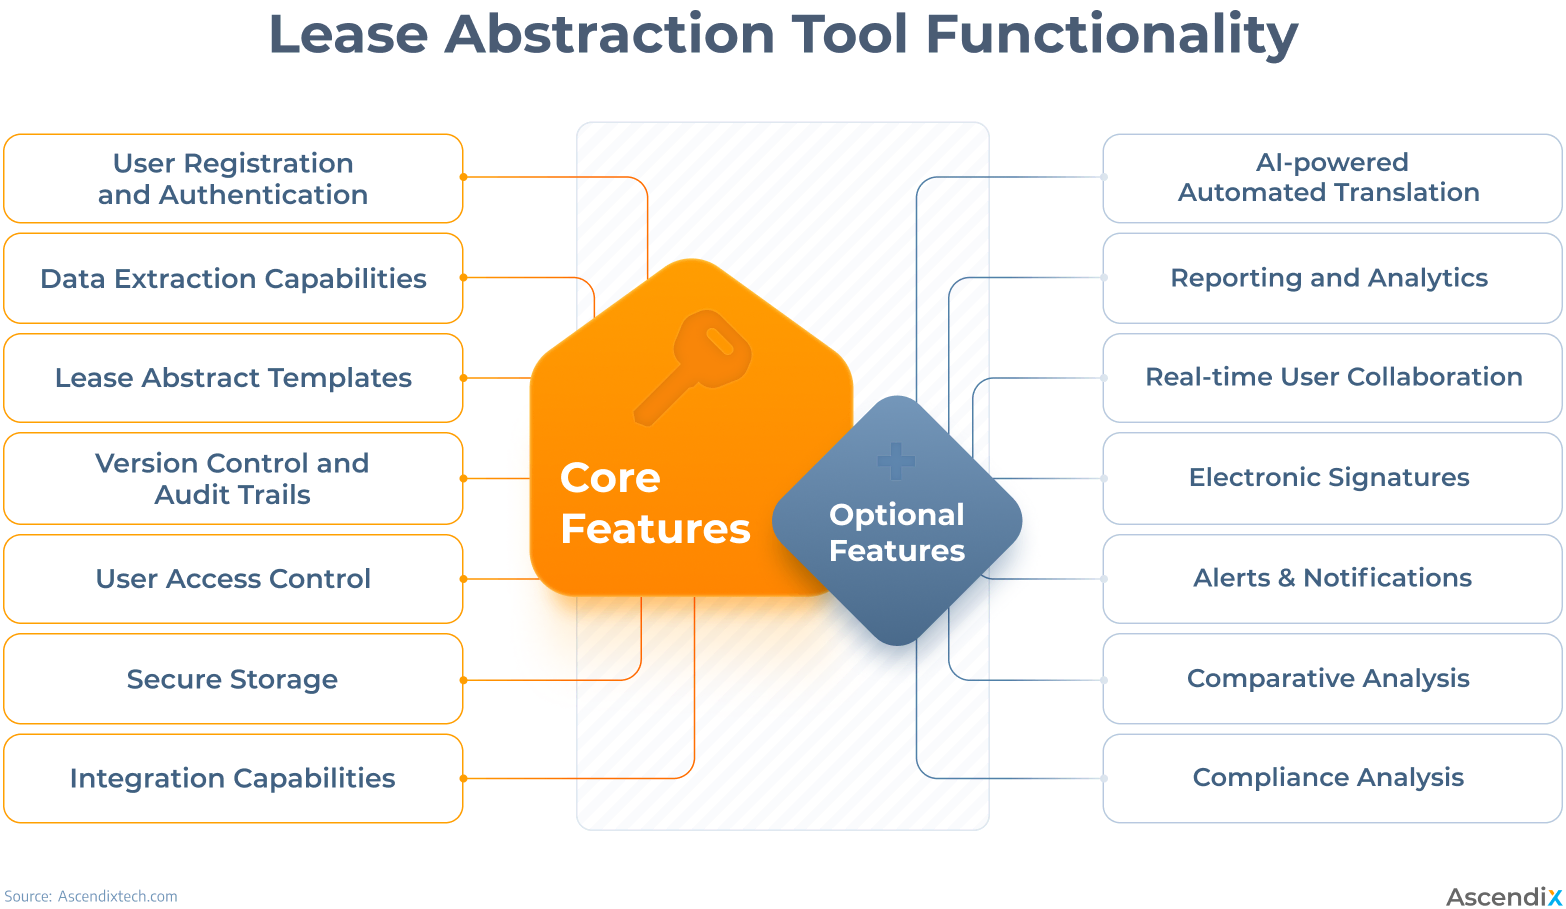 Lease Abstraction Tool Functionality